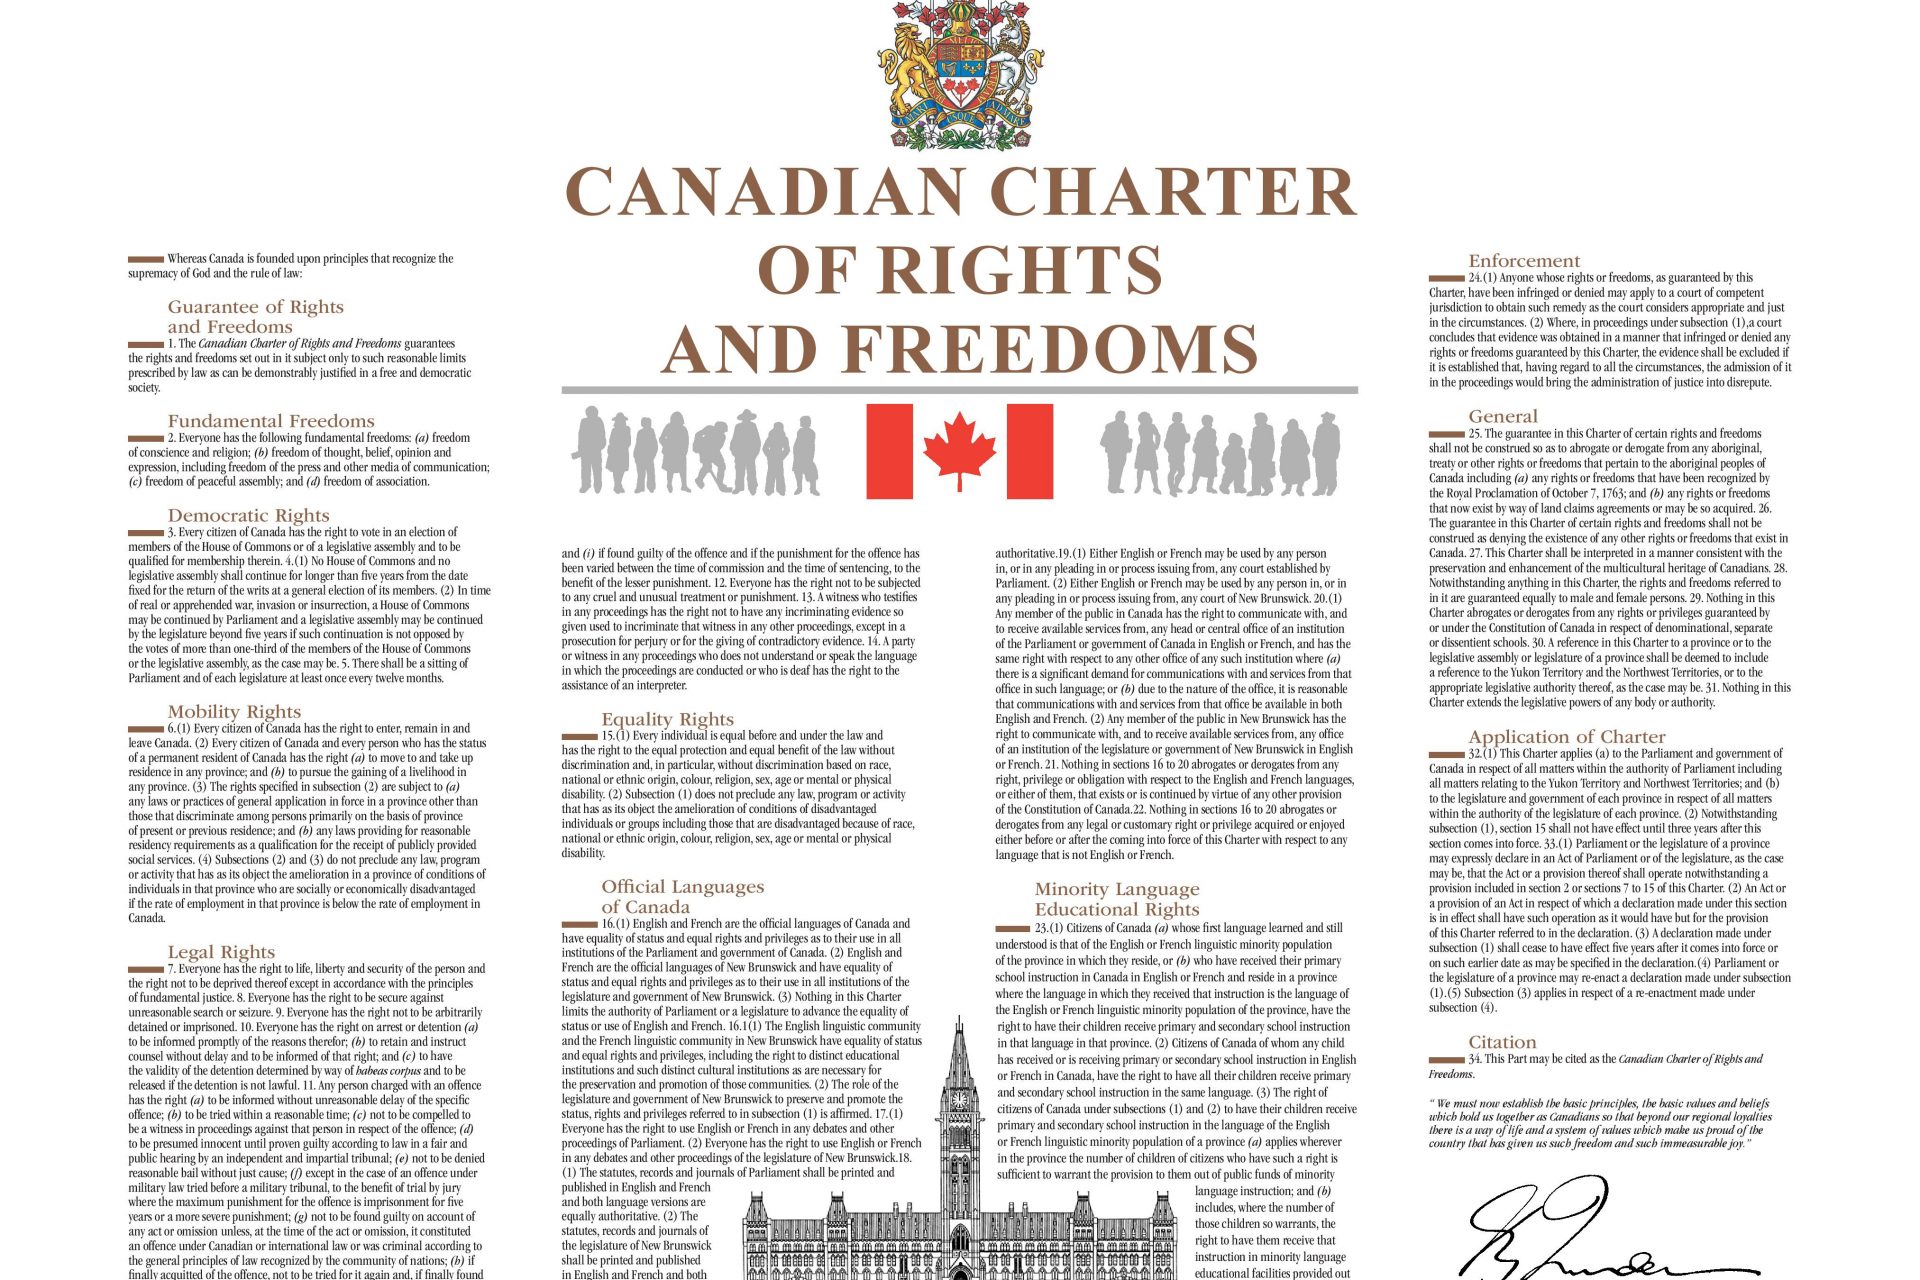 Canadians don’t understand their Charter well